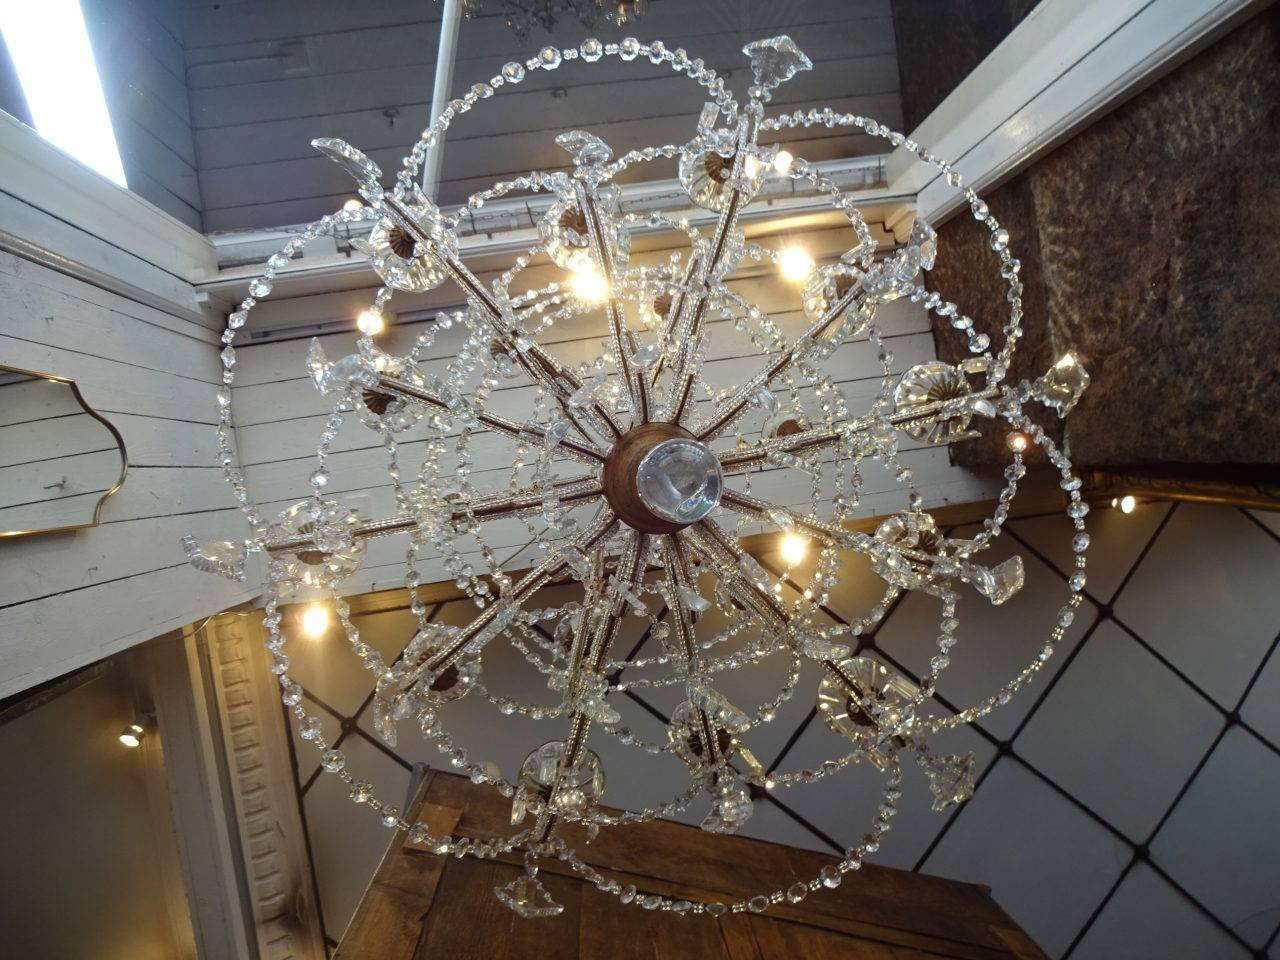 Other Gigantic French Chandelier